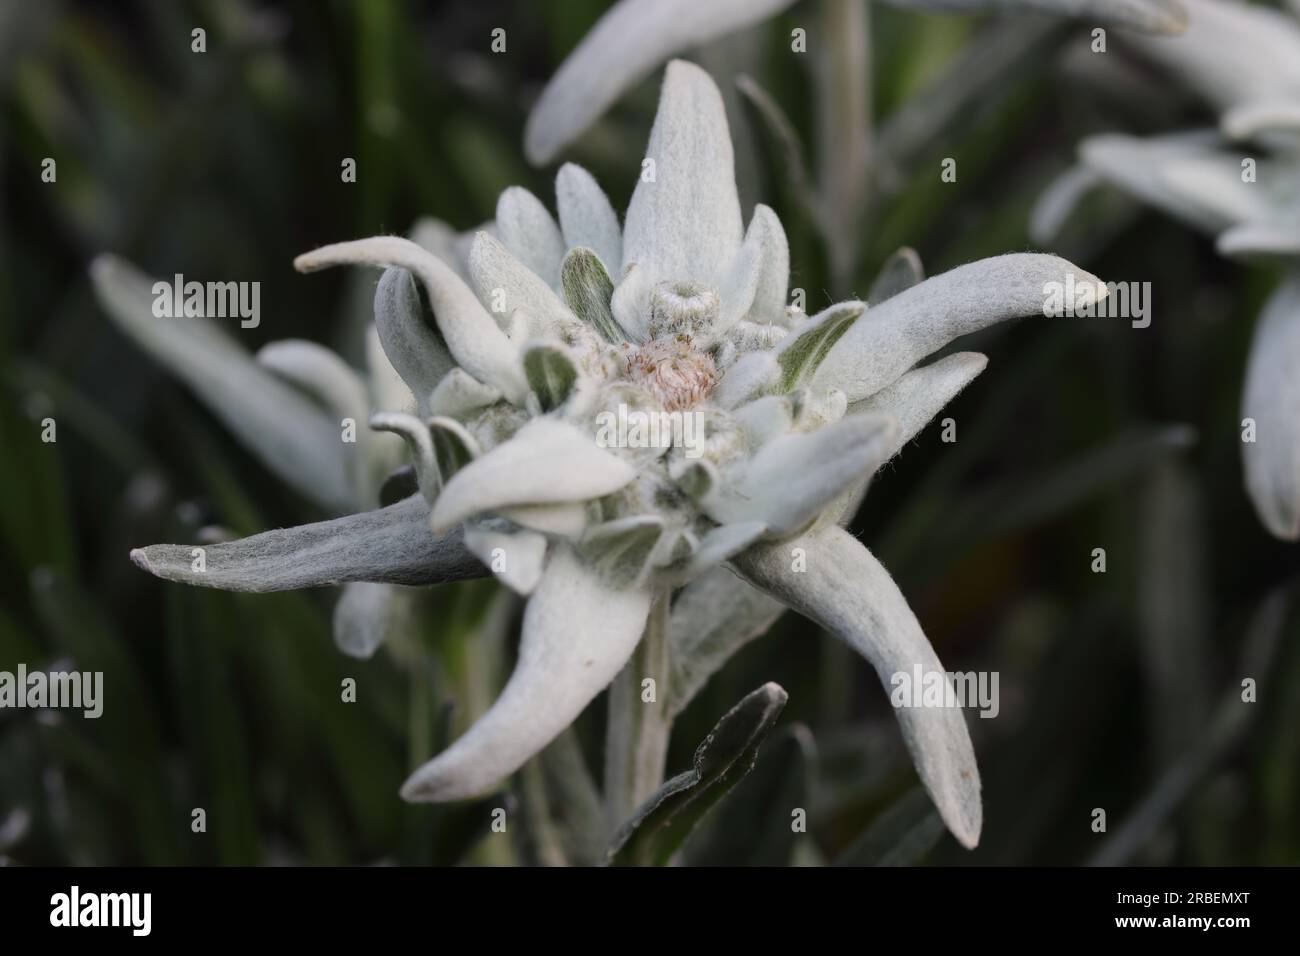 Close-up of a beautiful single edelweiss flower against a blurry natural background Stock Photo